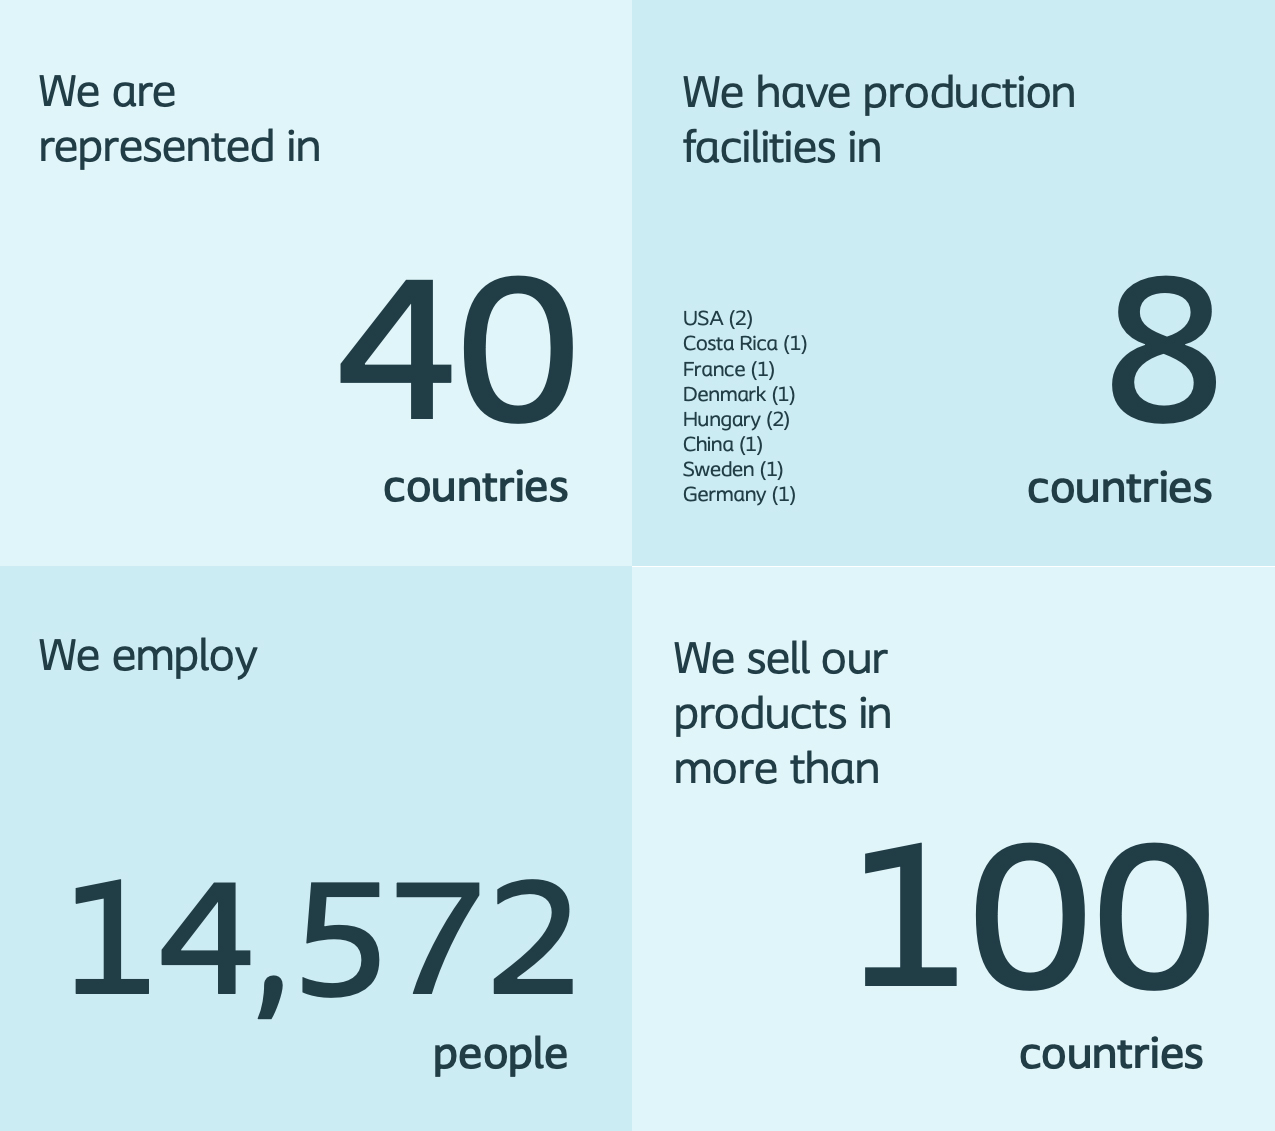 We are represented in 40 countries. We have production facilities in 8 countries: USA (2), Costa Rica (1), France (1), Denmark (1), Hungary (2), China (1), Sweden (1), Germany(1). We employ 14,572 people. We sell our products iun more than 100 countires.